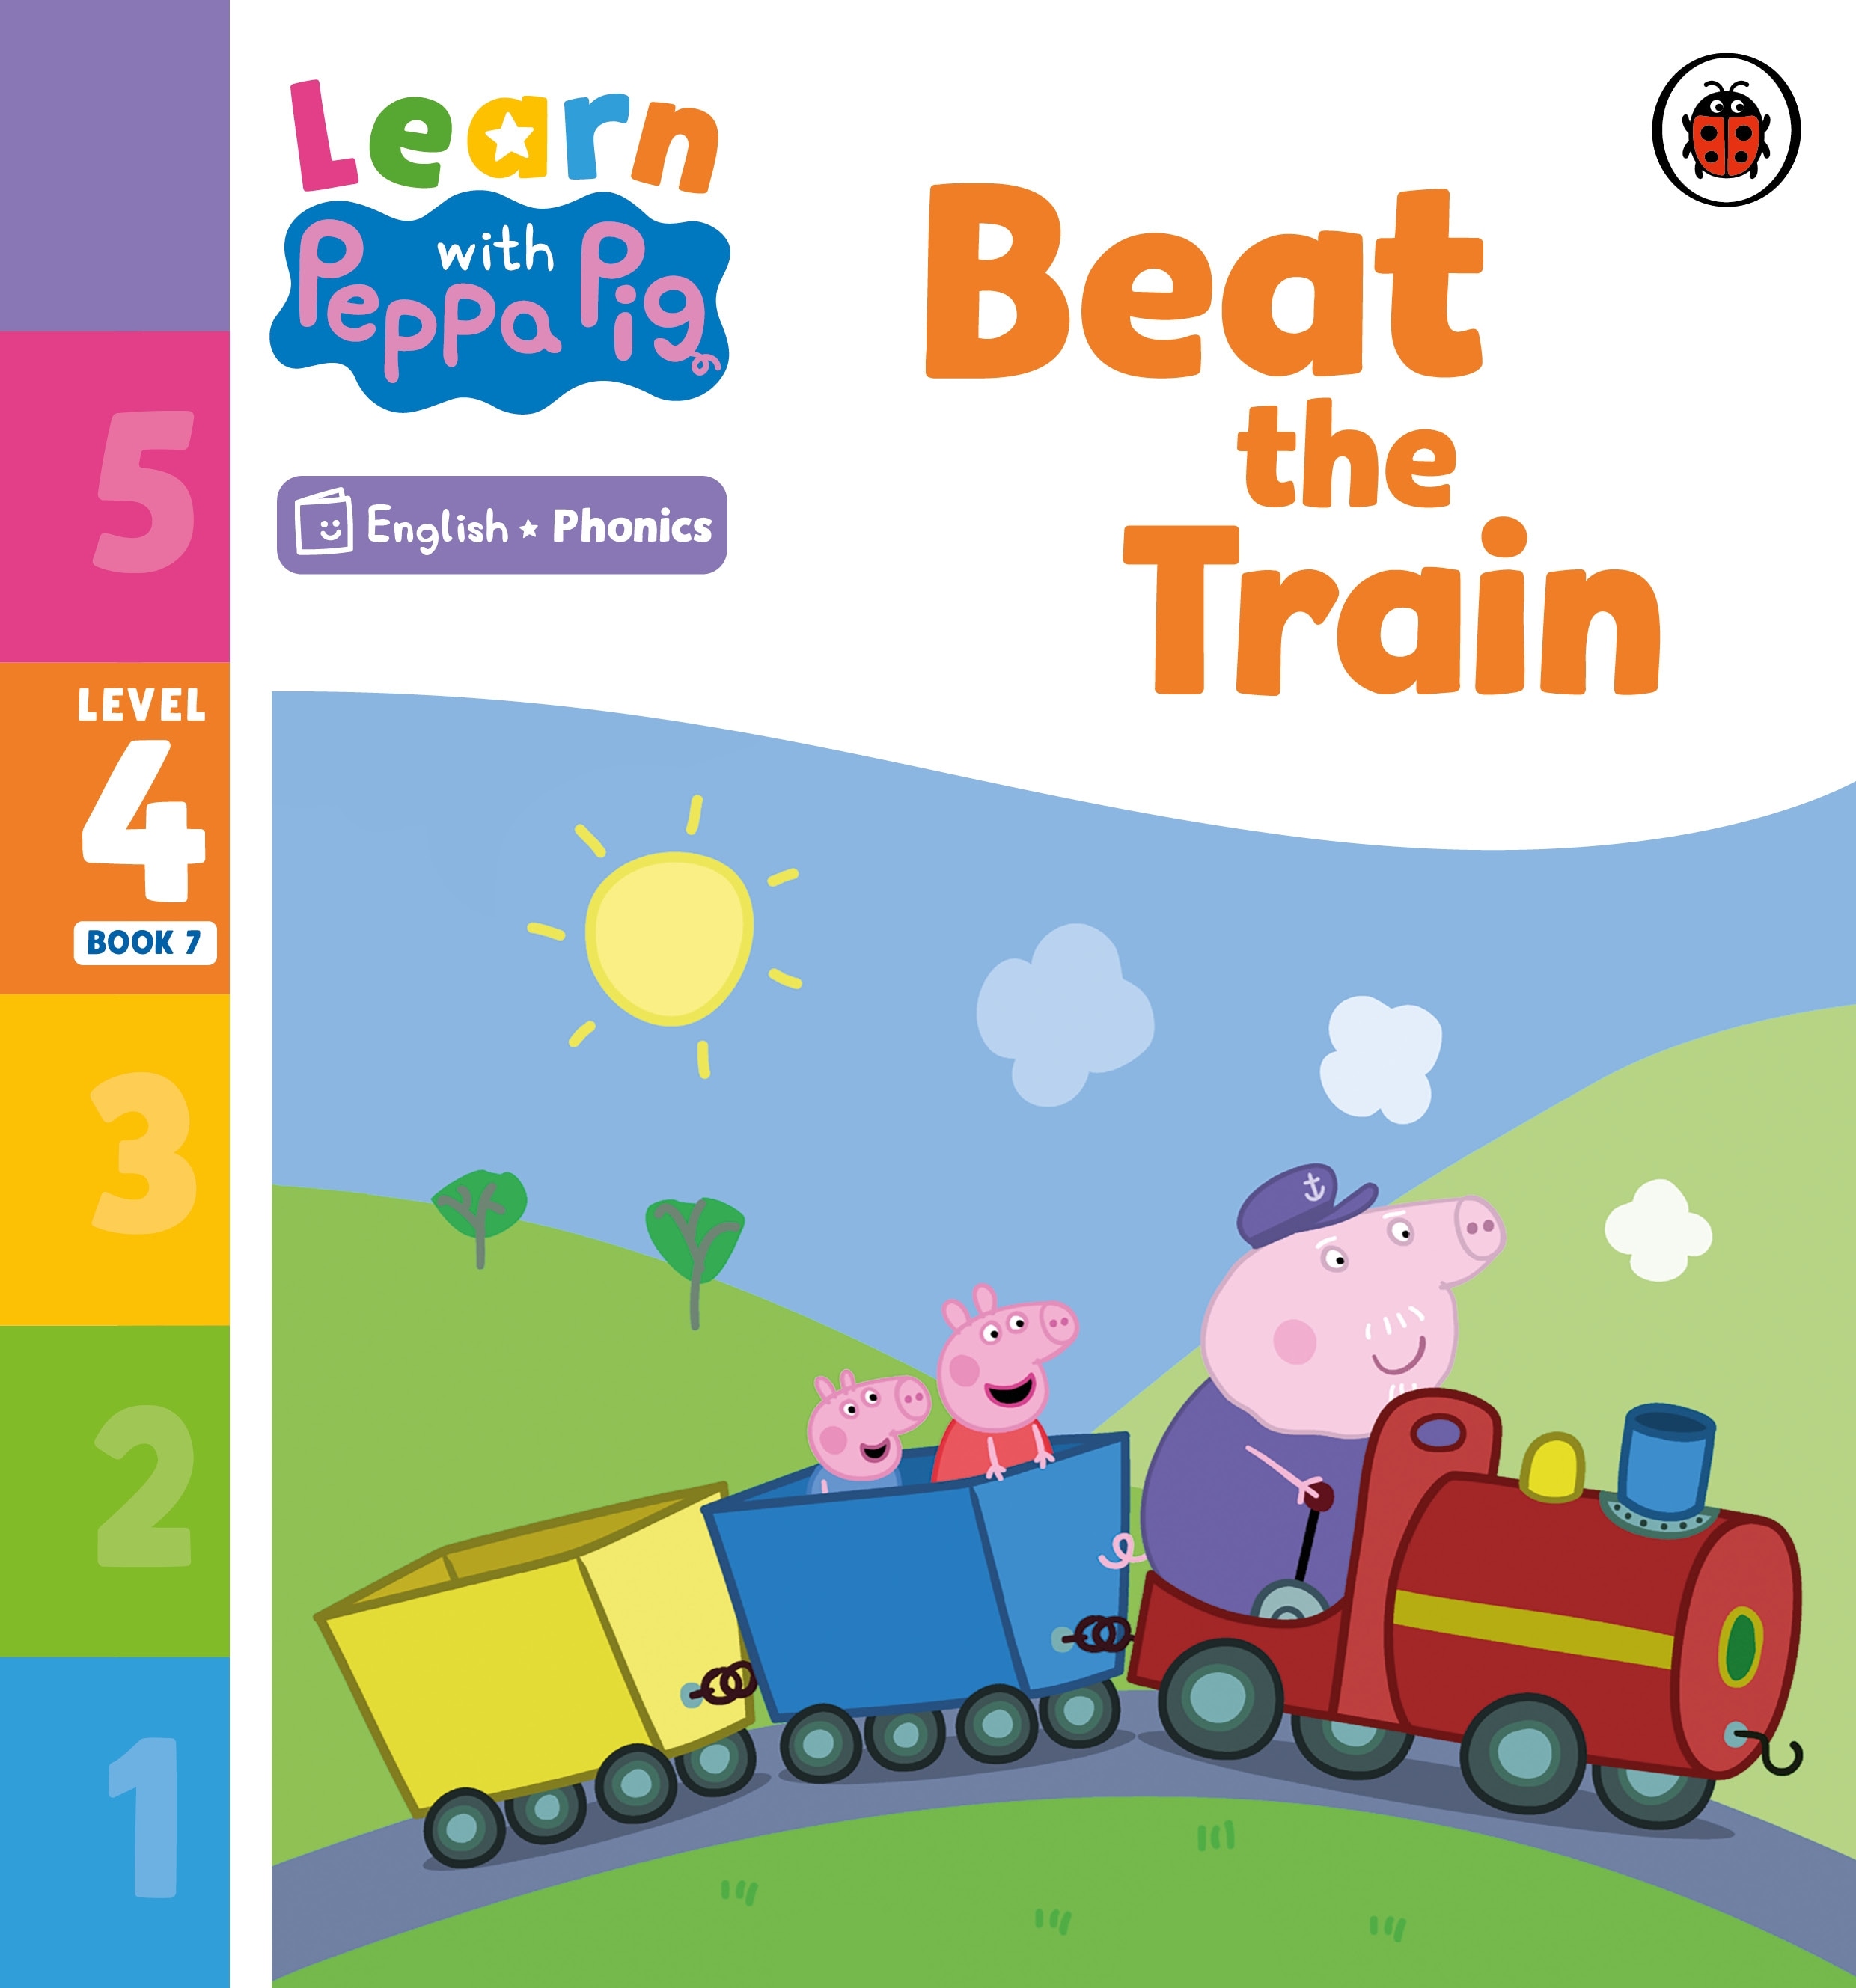 Learn with Peppa Phonics Level 4 Book 7 — Beat the Train (Phonics Reader)